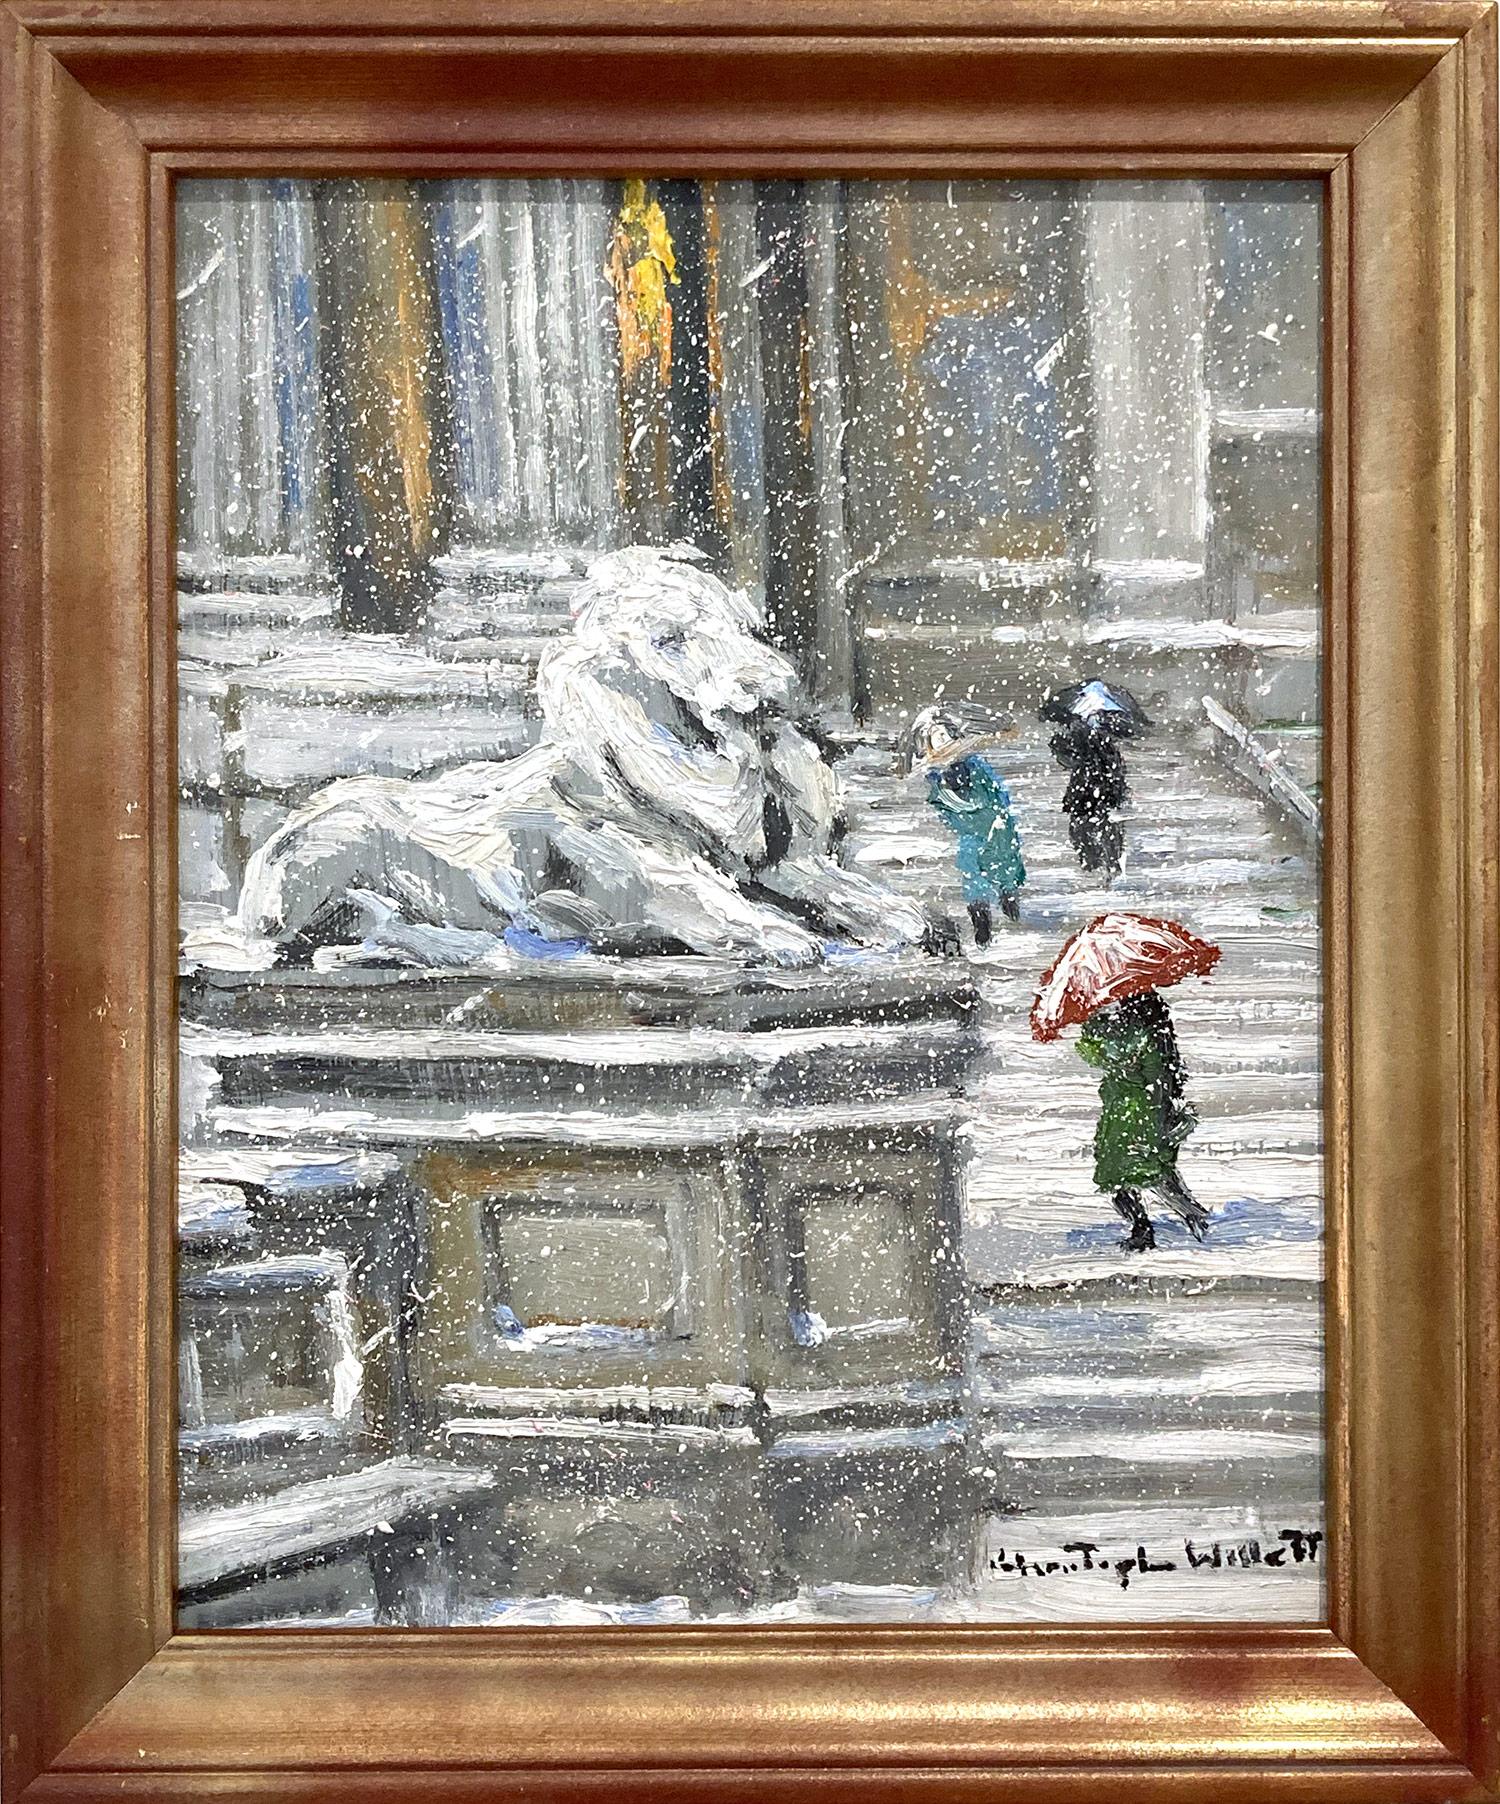 Christopher Willett Figurative Painting - "The Guardian, New York City Library" Impressionist Snow Scene Oil Painting